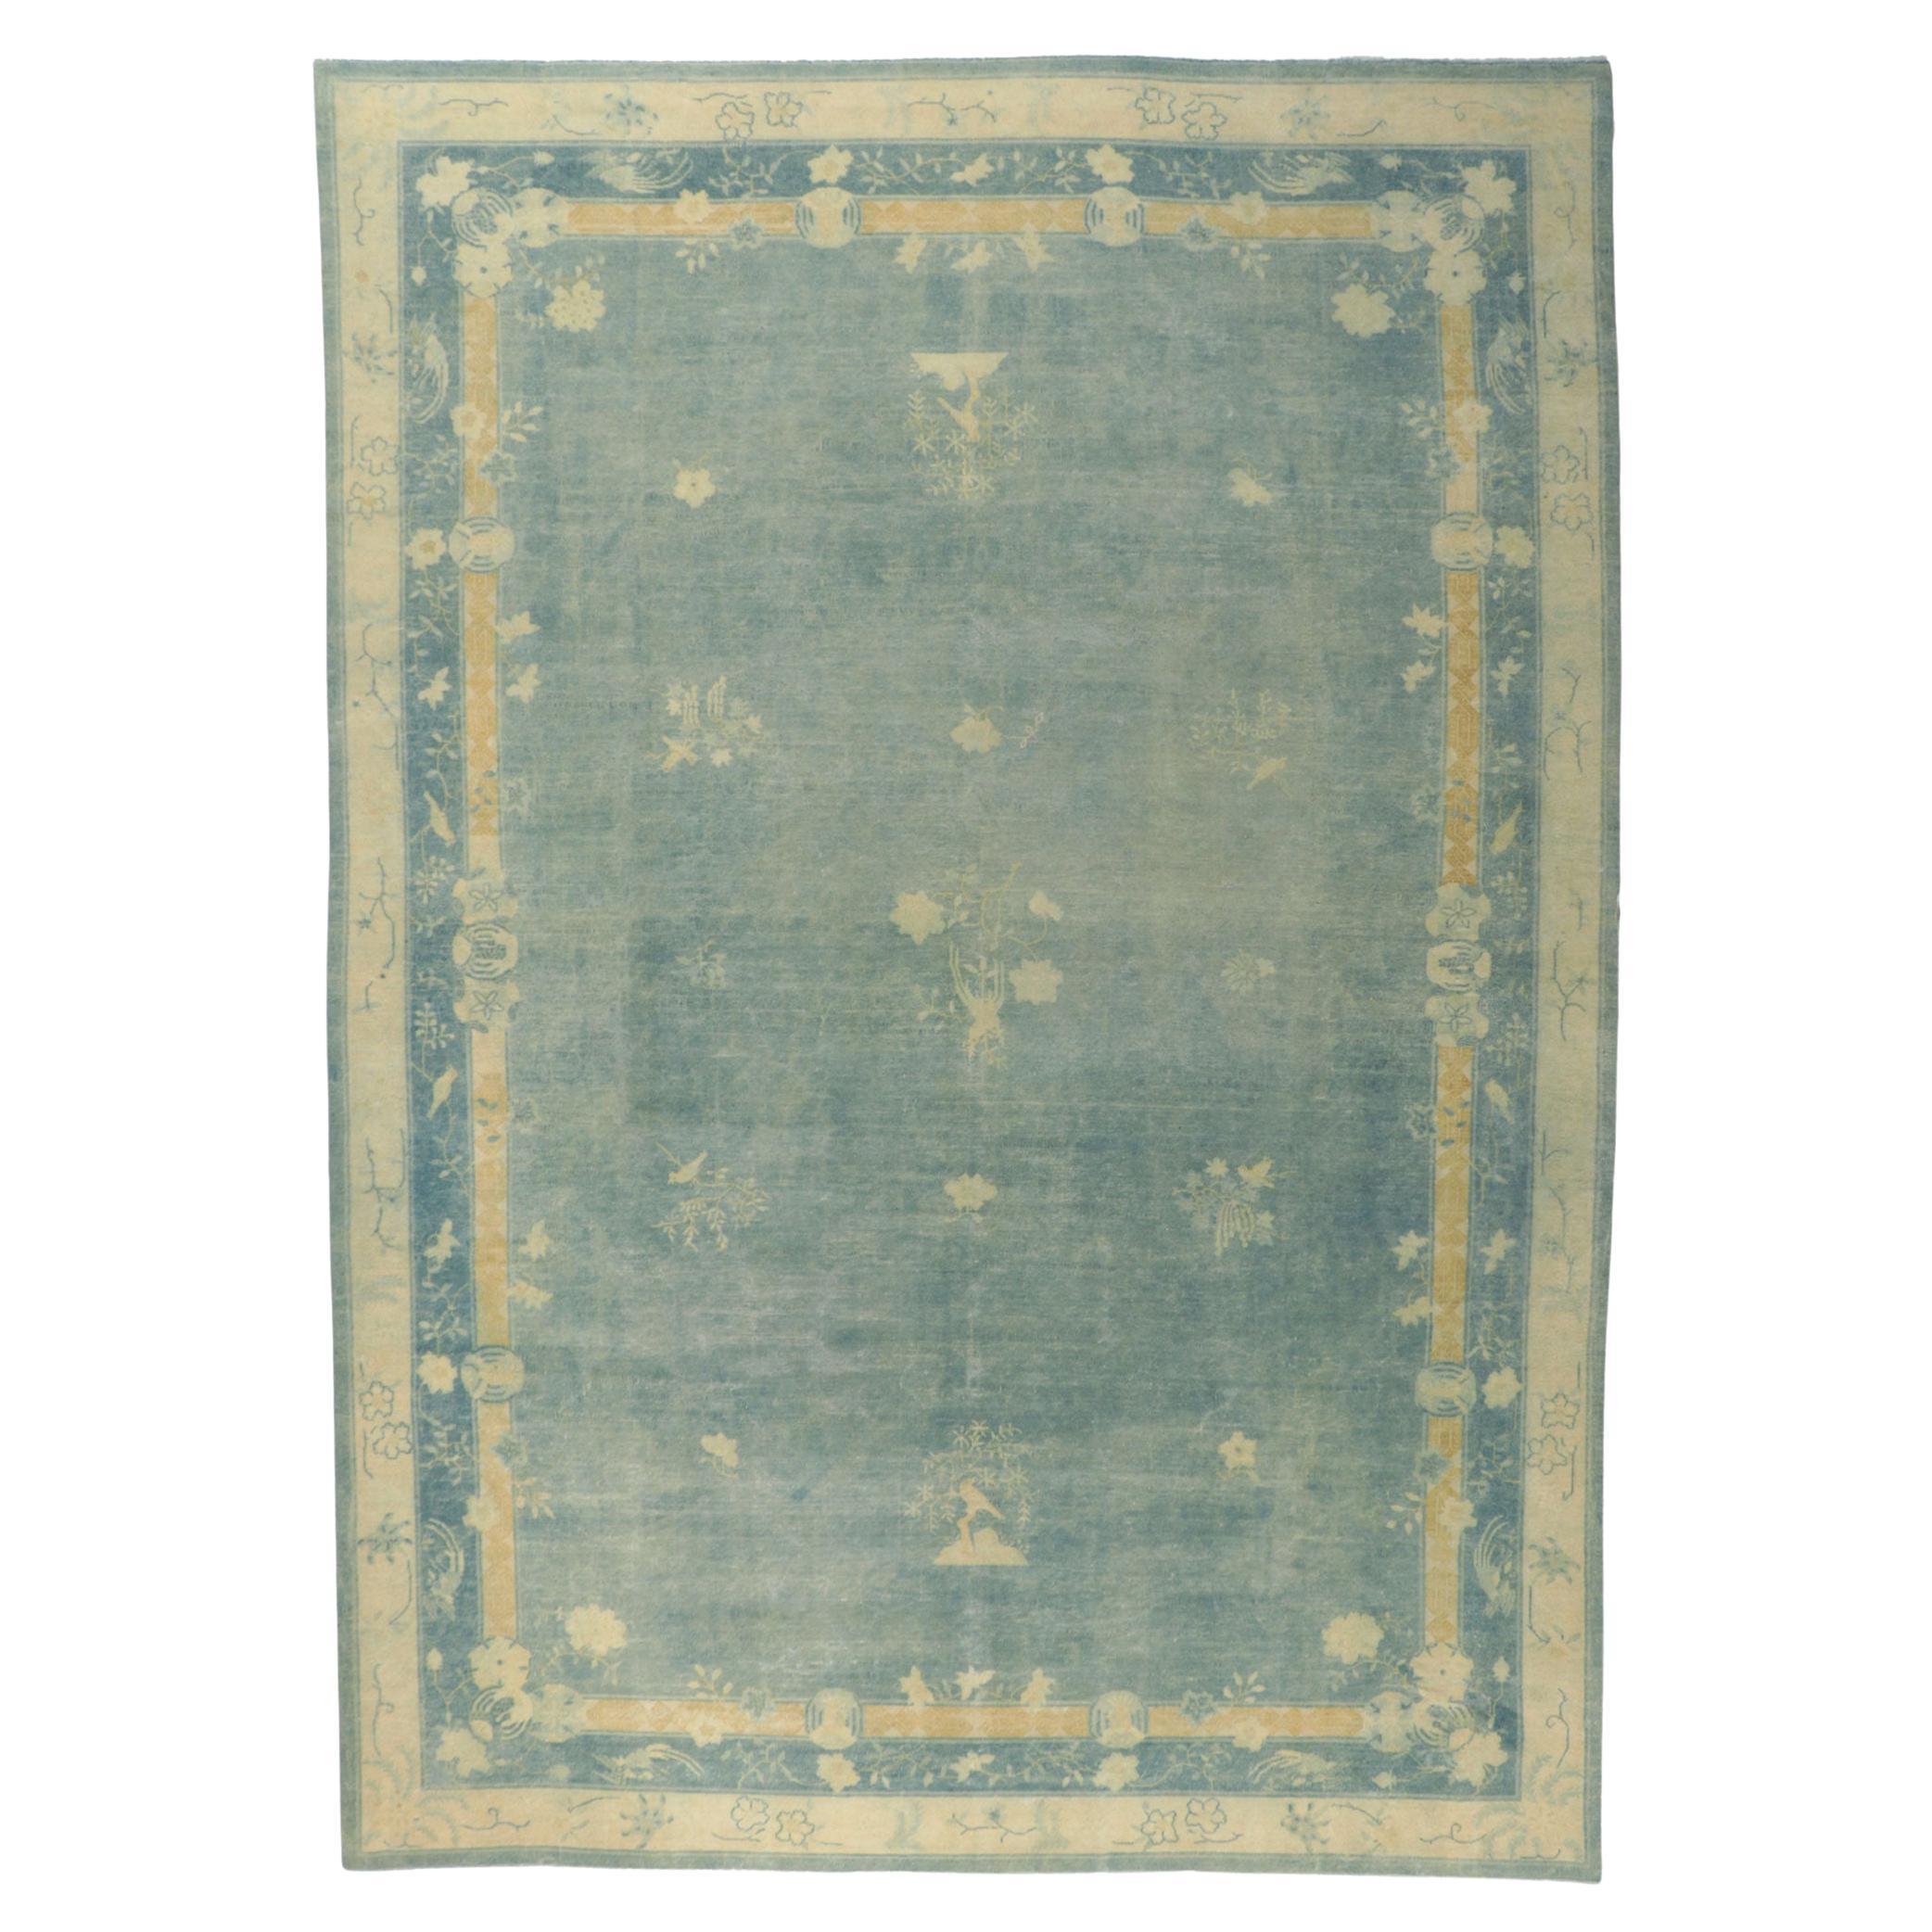 1880s Antique Chinese Peking Rug, Chinoiserie Chic Meets Quiet Sophistication